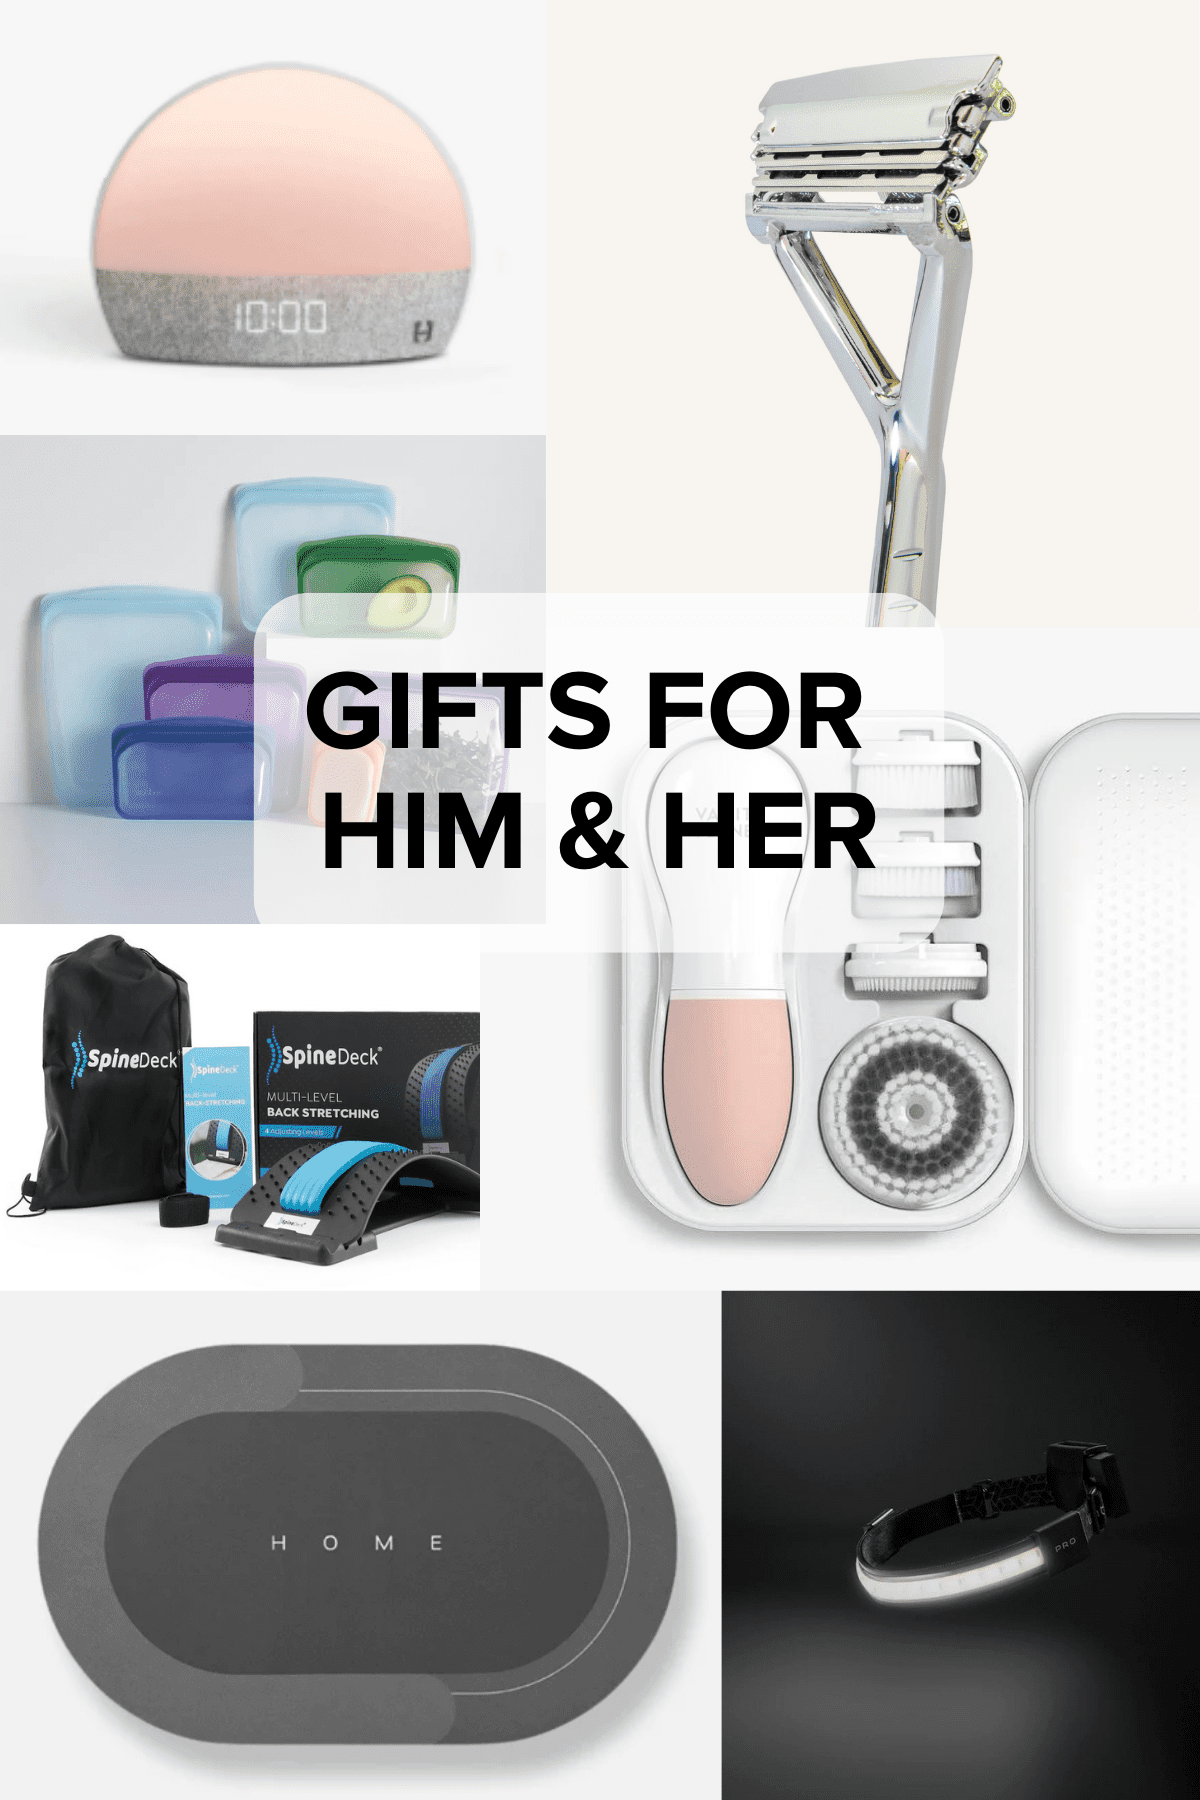 A collage of images featuring gifts for him and her! Includes things like shower mats, Lightbar headlamp, razor and beauty products.